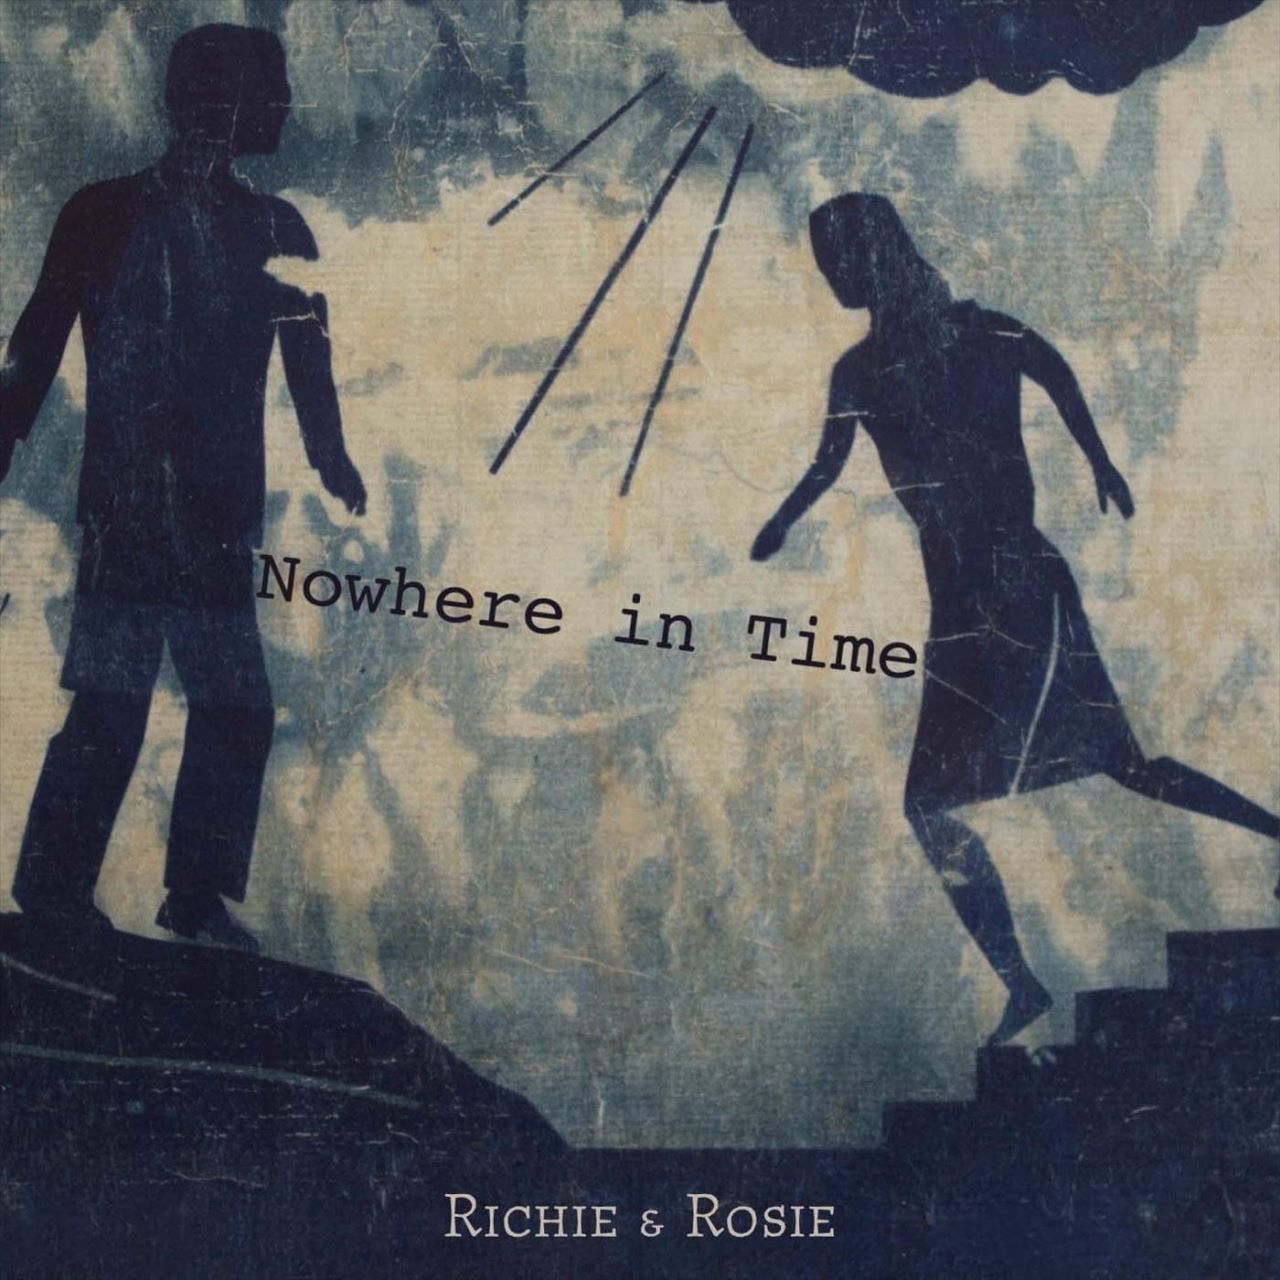 Richie & Rosie - Nowhere In Time cover album